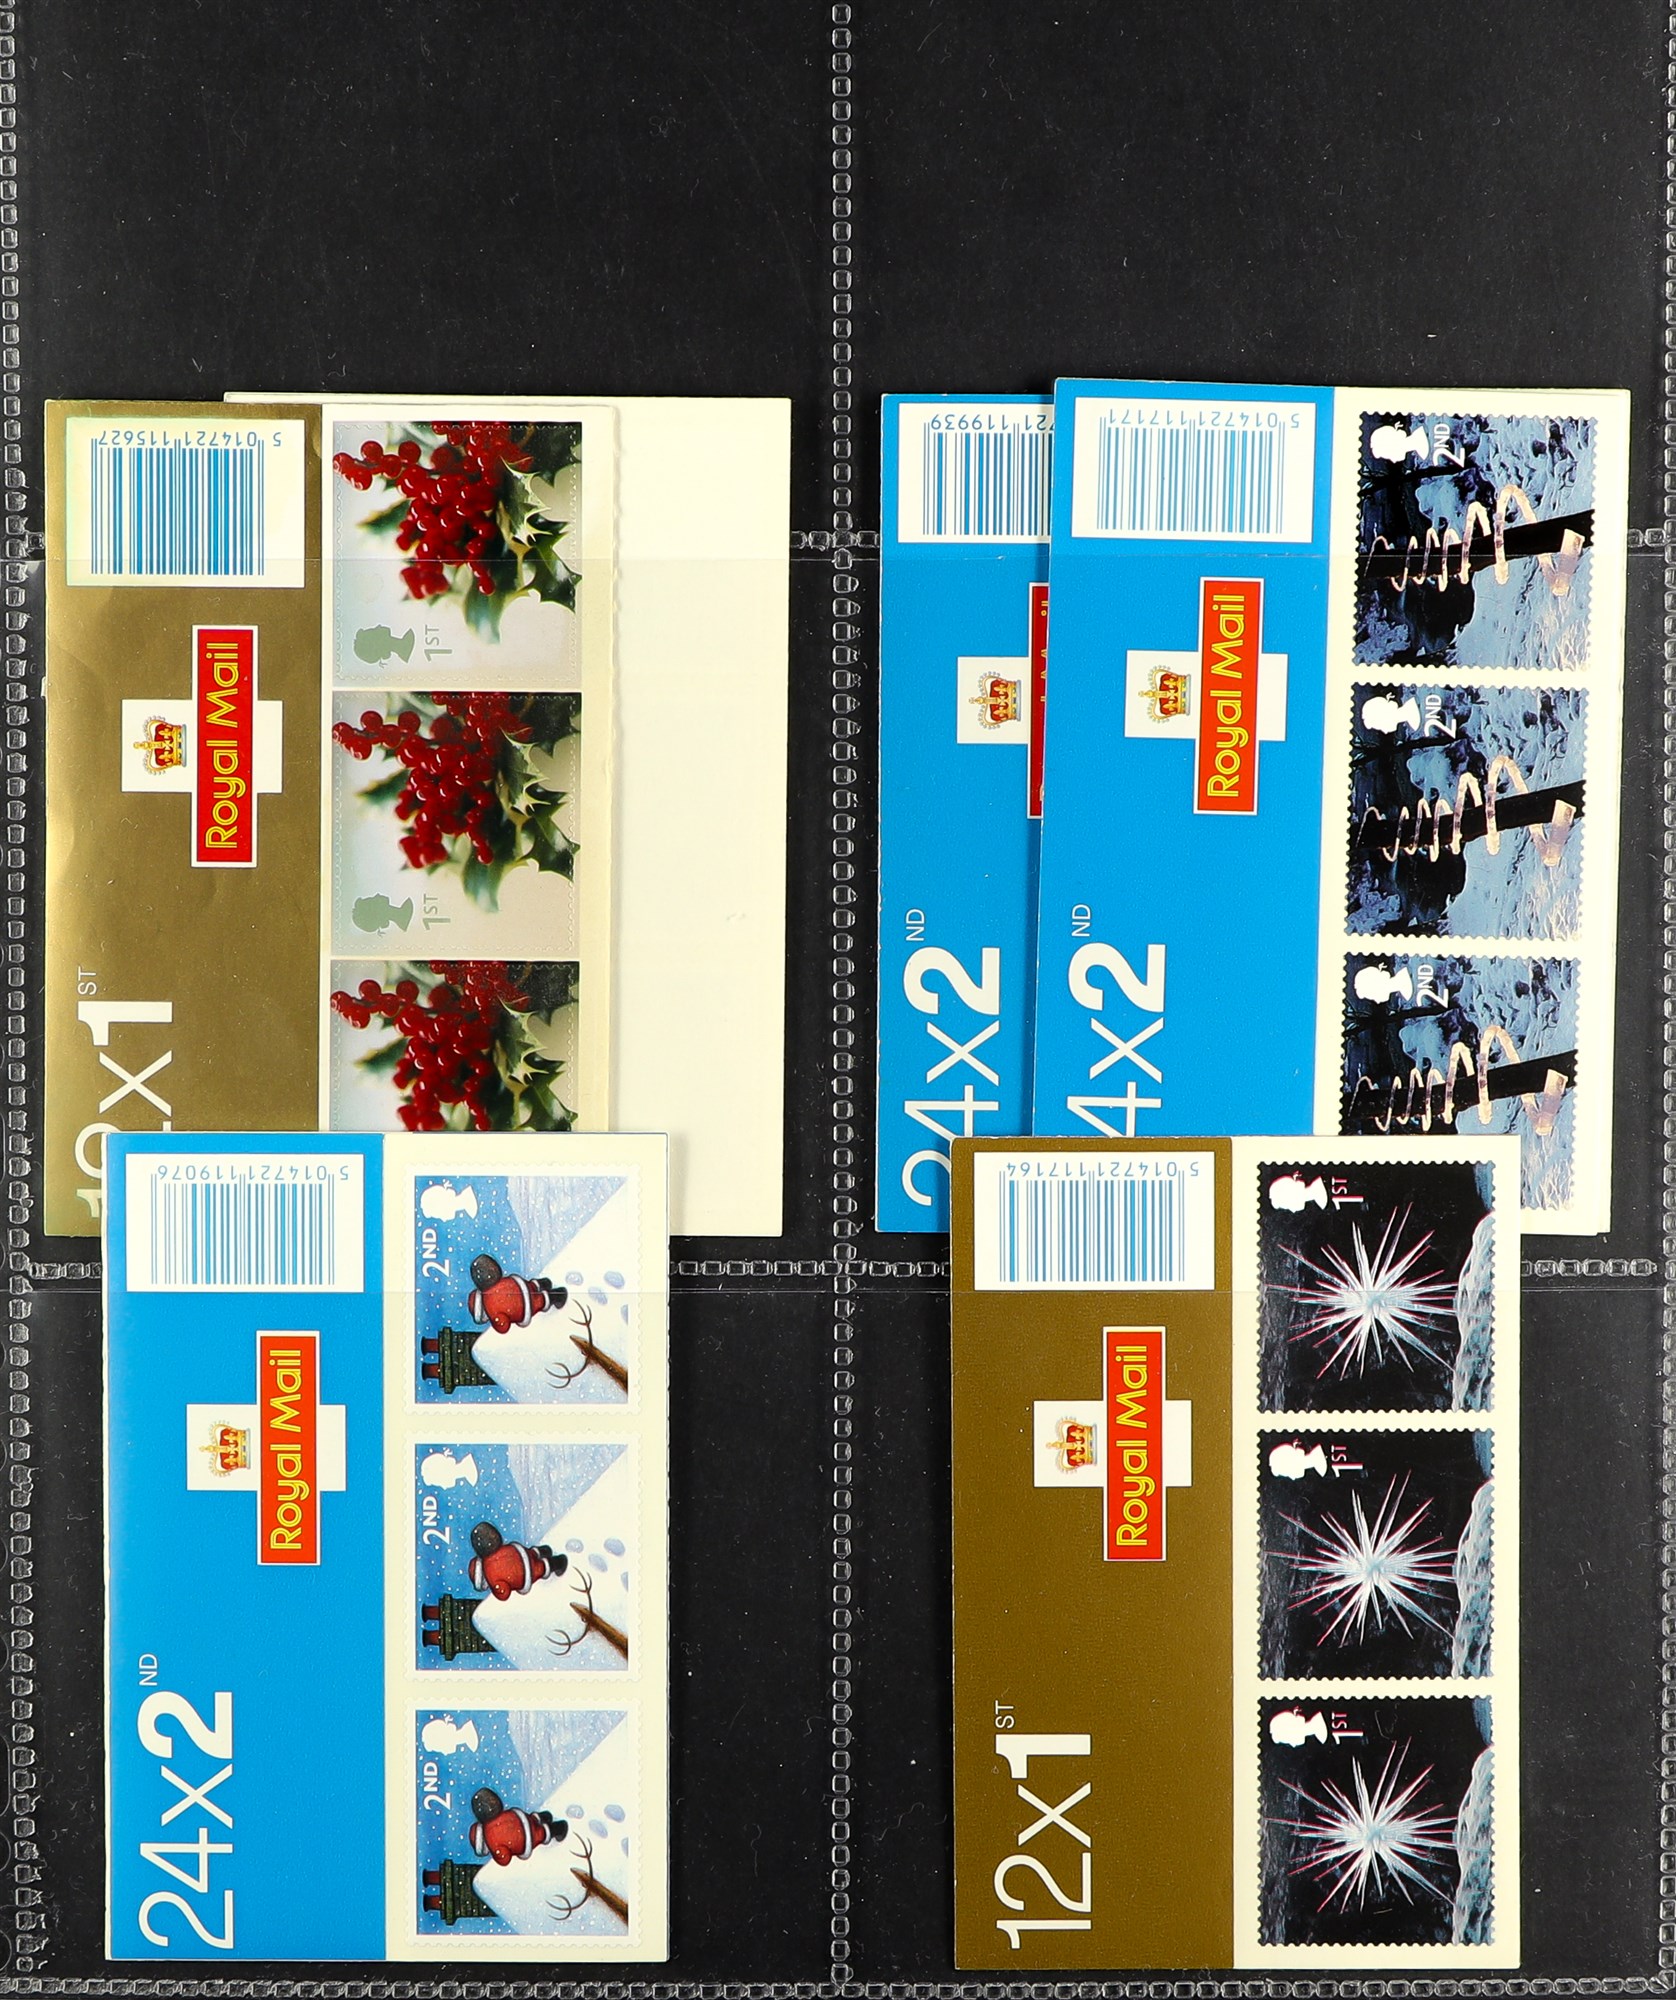 GB.ELIZABETH II BOOKLETS 1970's-2010's collection of barcode & folded booklets in five albums, - Image 10 of 23